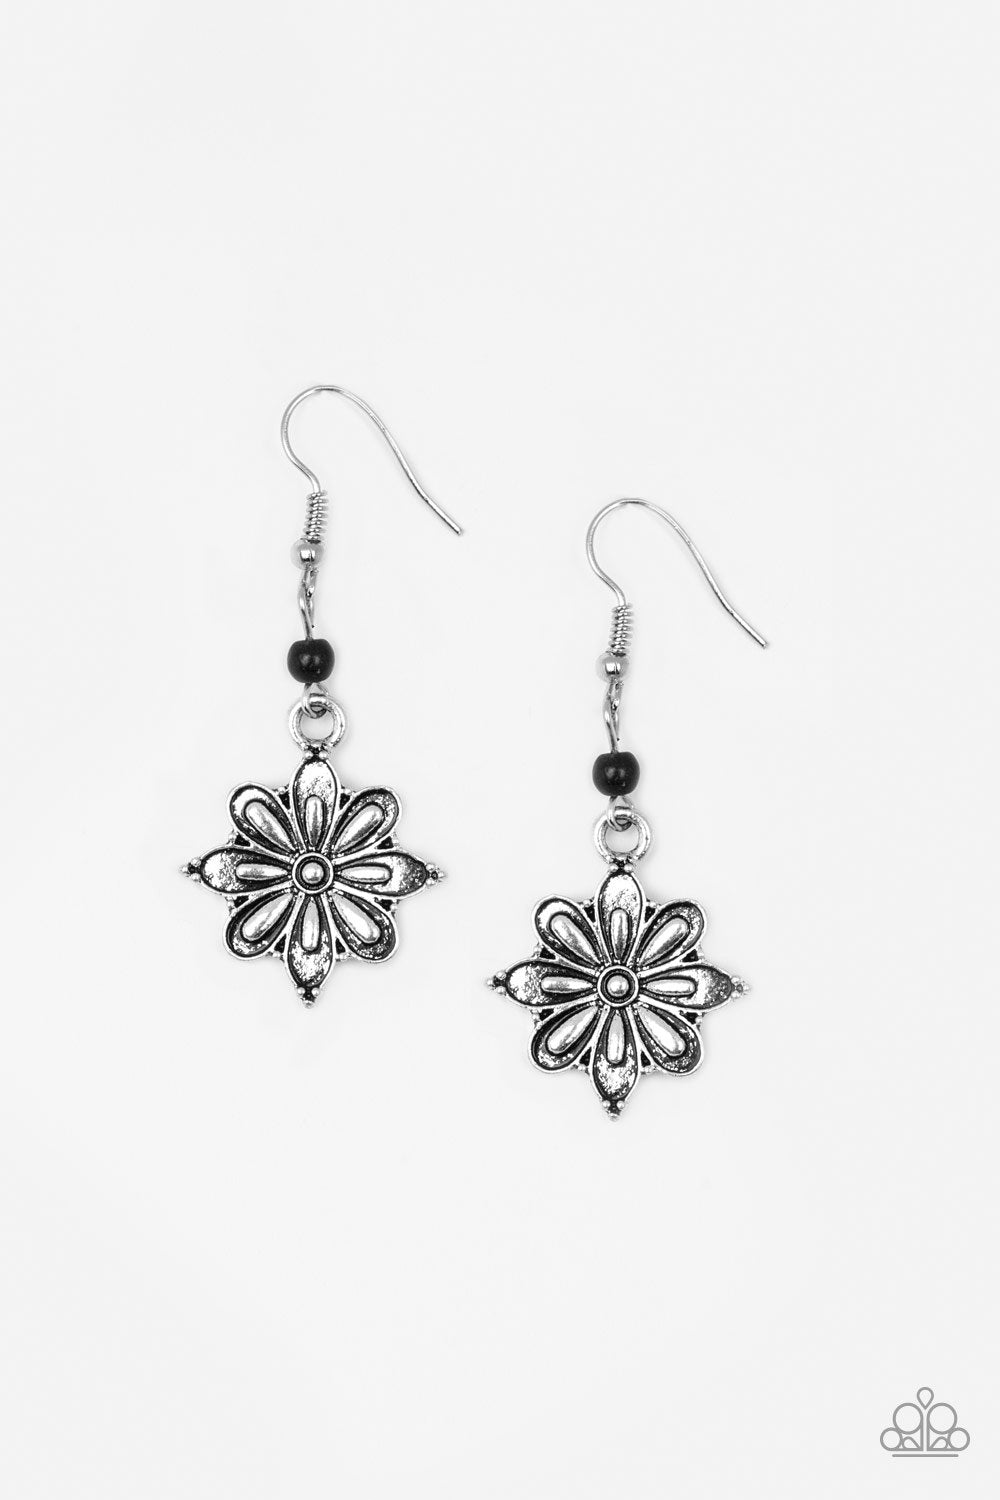 Cactus Blossom Black and Silver Flower Earrings - Paparazzi Accessories - lightbox -CarasShop.com - $5 Jewelry by Cara Jewels